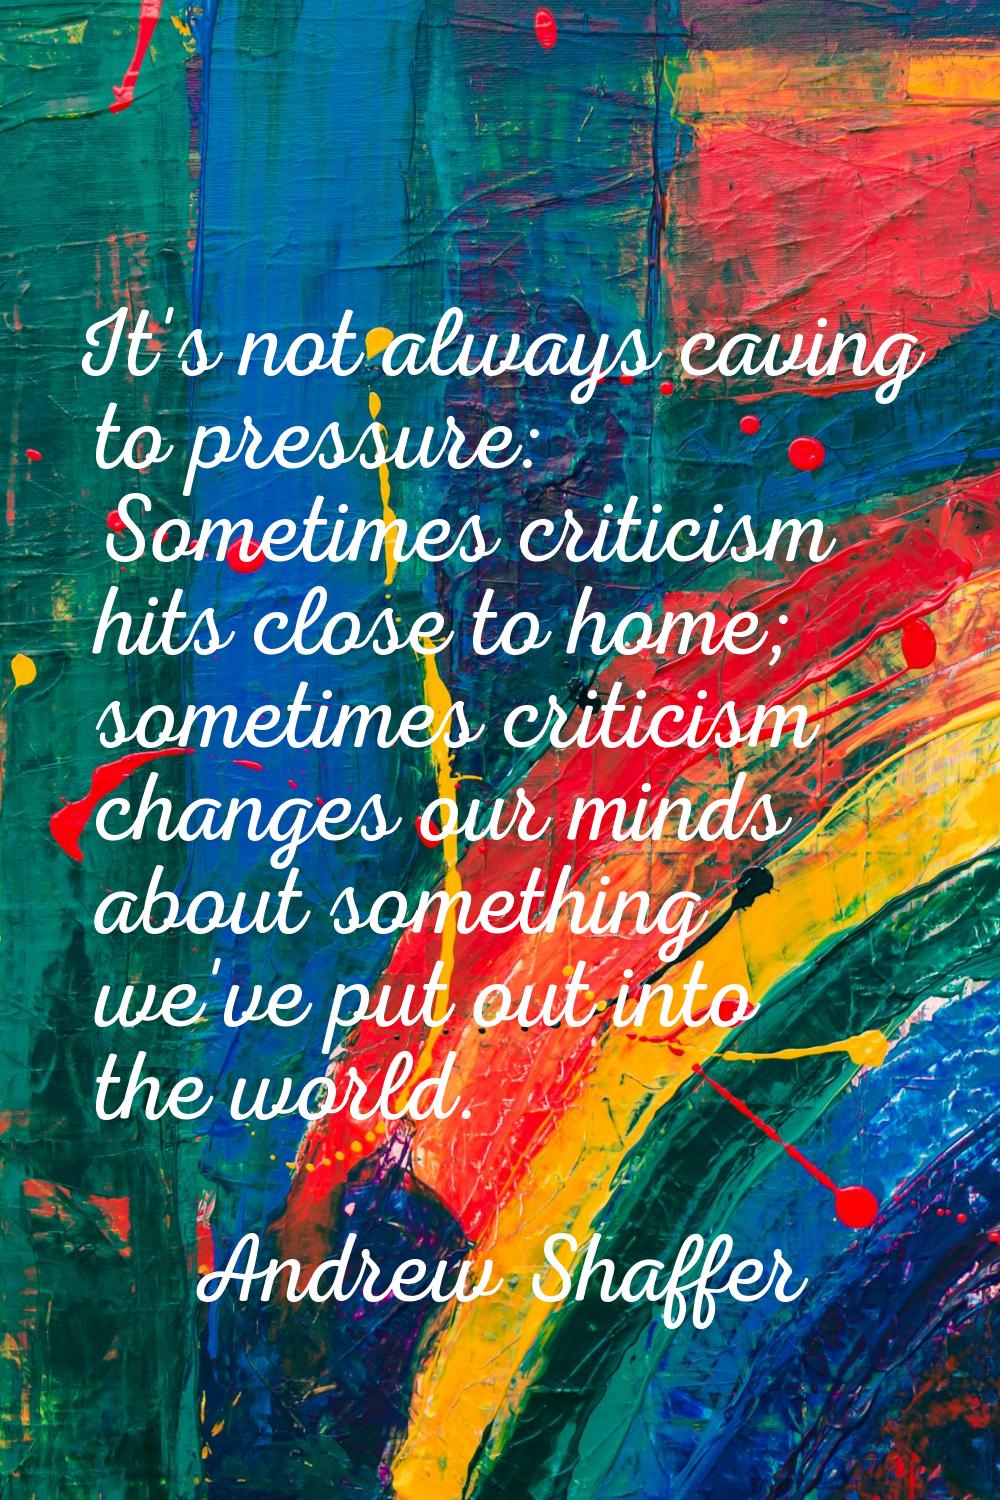 It's not always caving to pressure: Sometimes criticism hits close to home; sometimes criticism cha